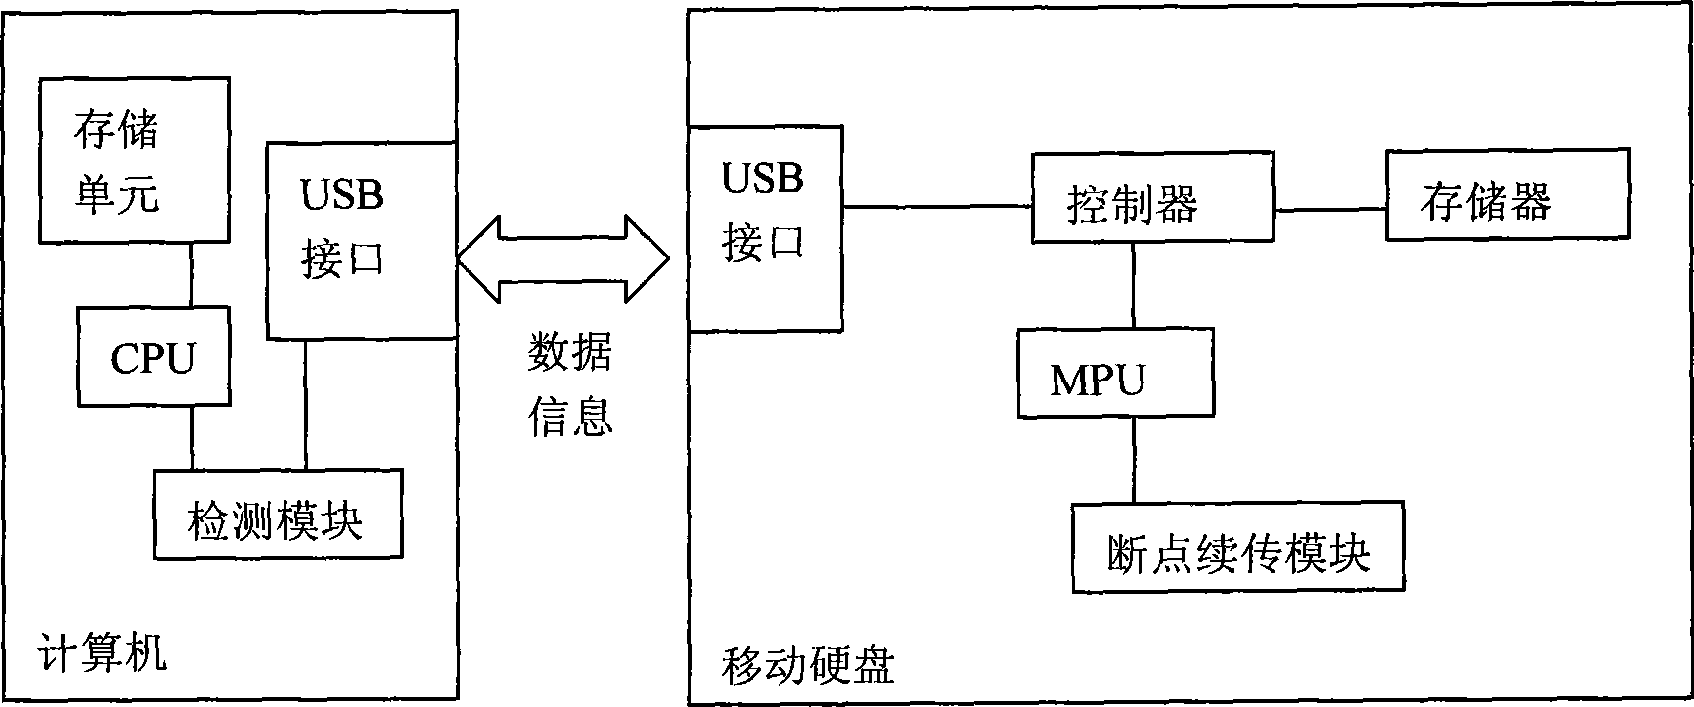 System for realizing breakpoint continuous transmission of mobile storage equipment